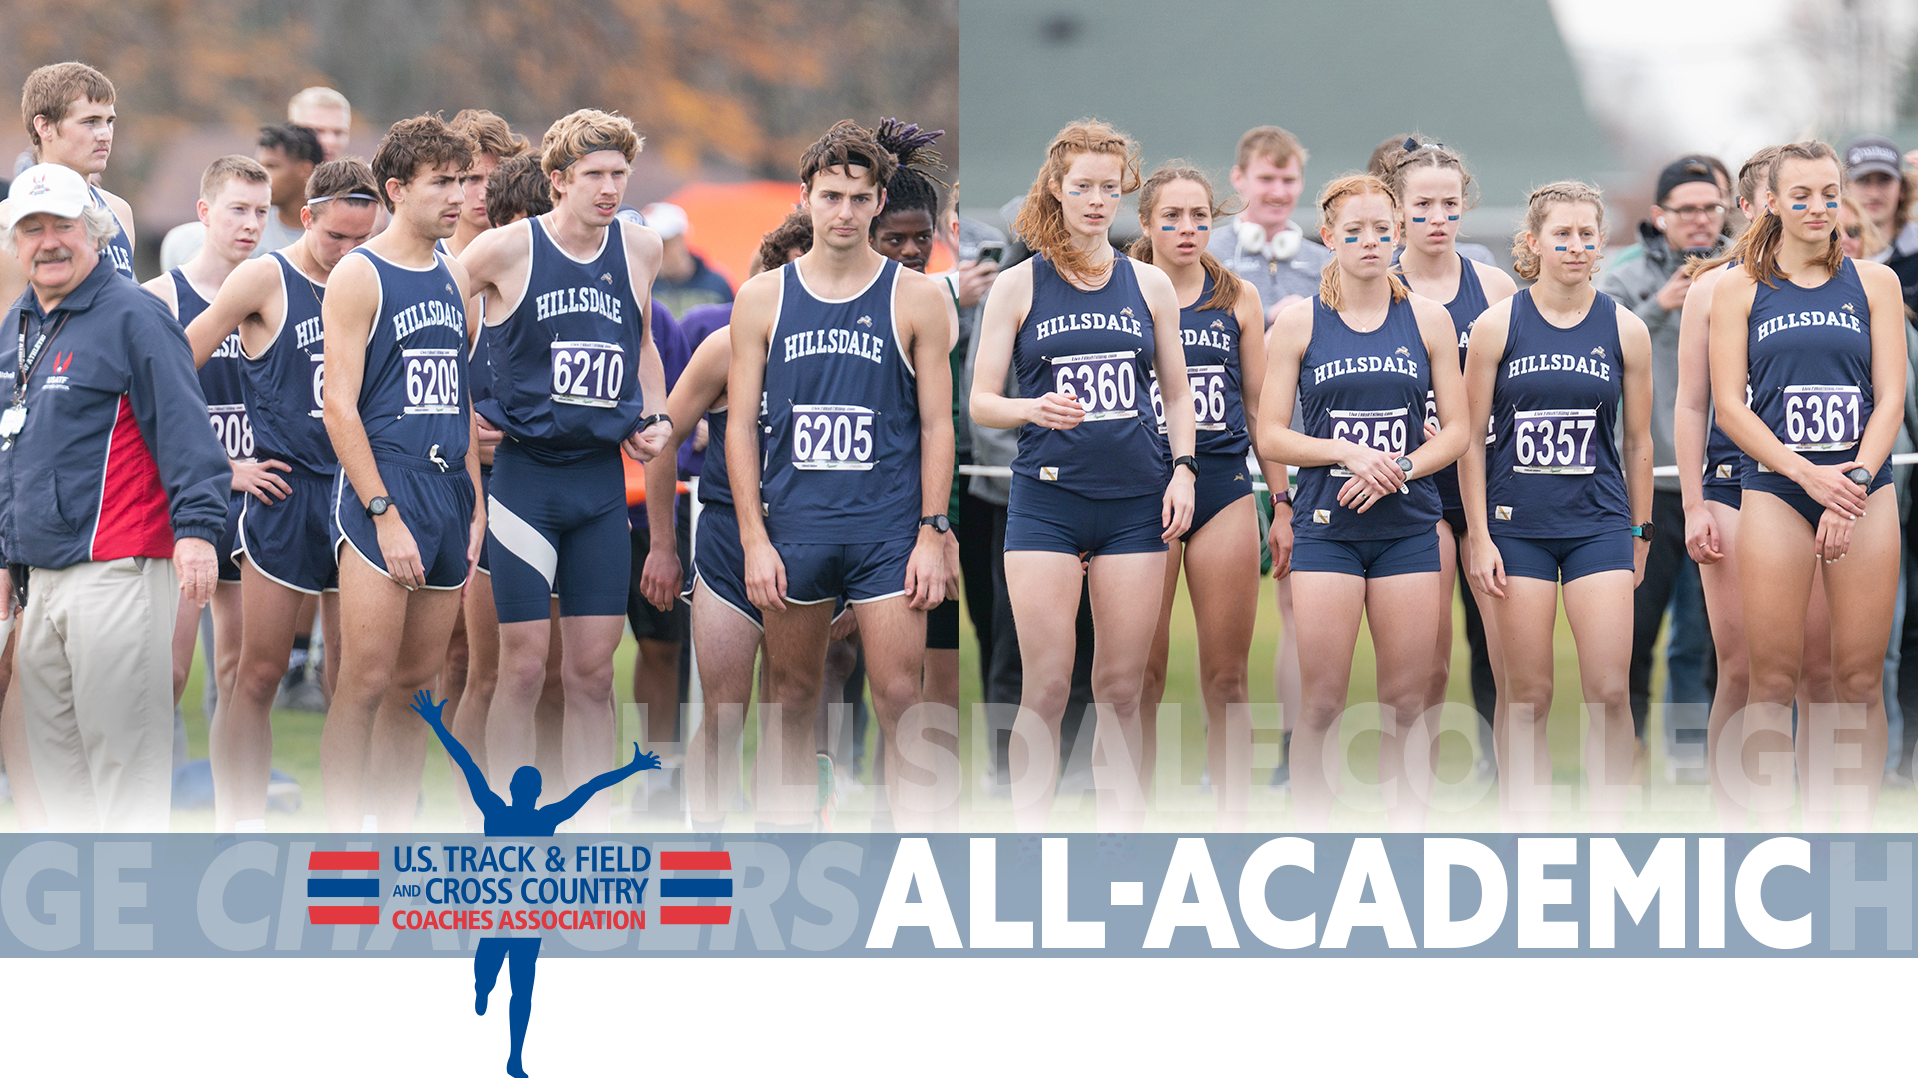 Chargers men's and women's cross country teams continue 10-year streak of USTFCCCA academic honors